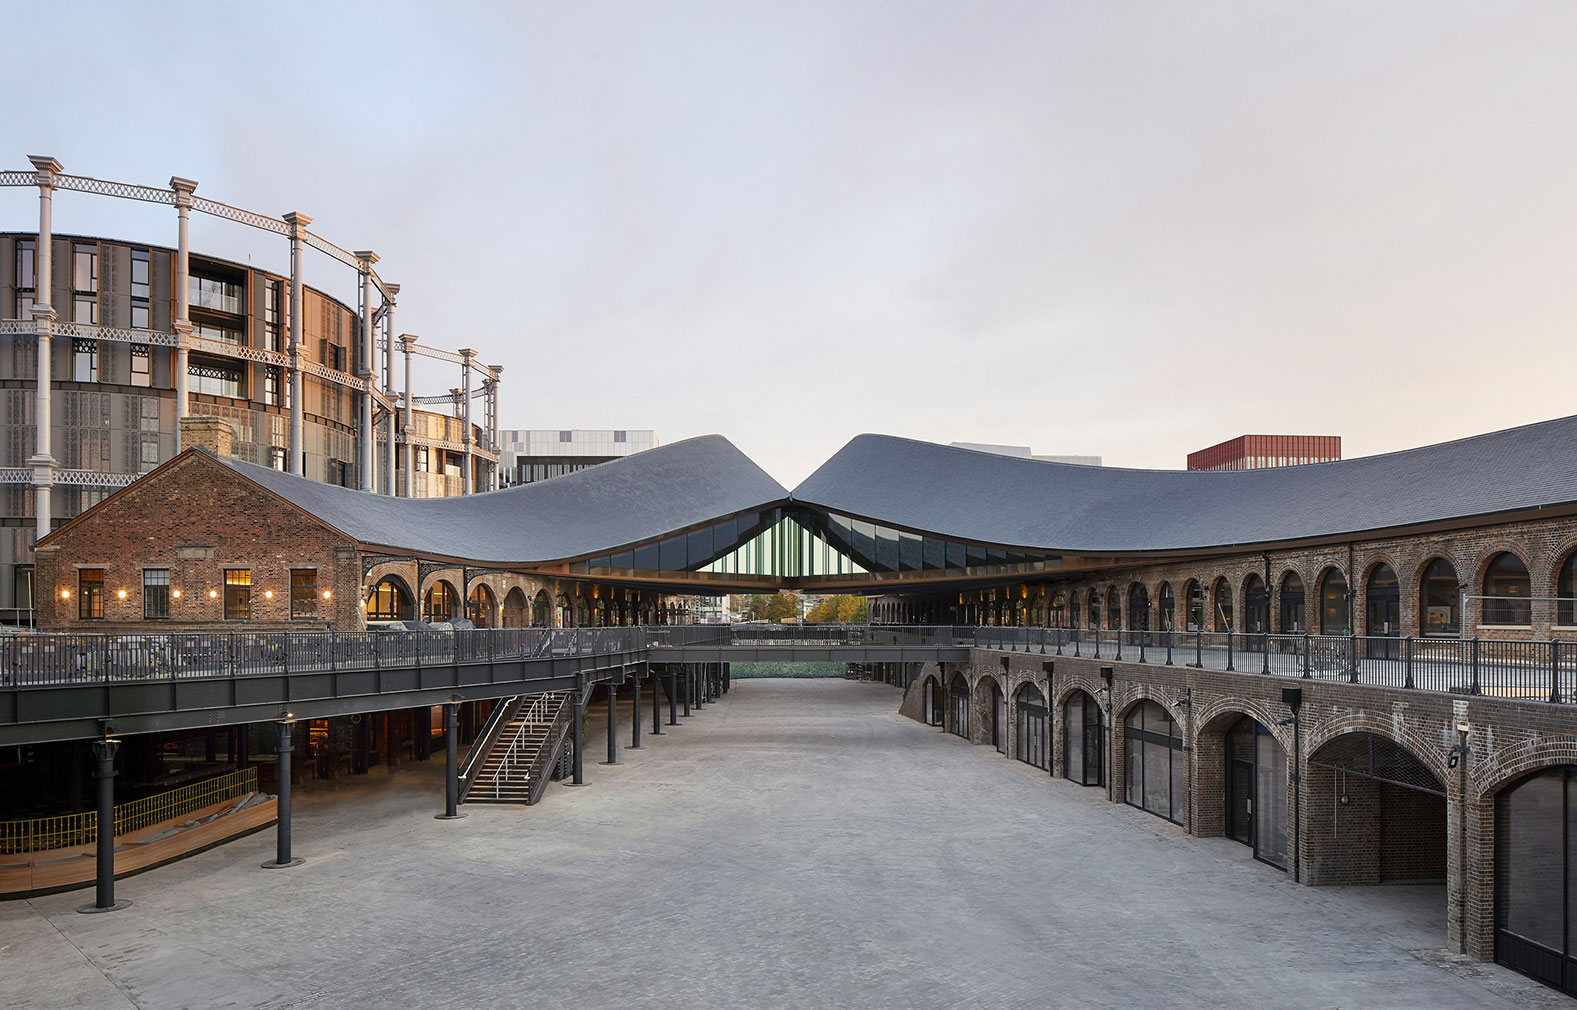 Adaptive reuse projects 2018: Coal Drops Yard, converted by Thomas Heatherwick